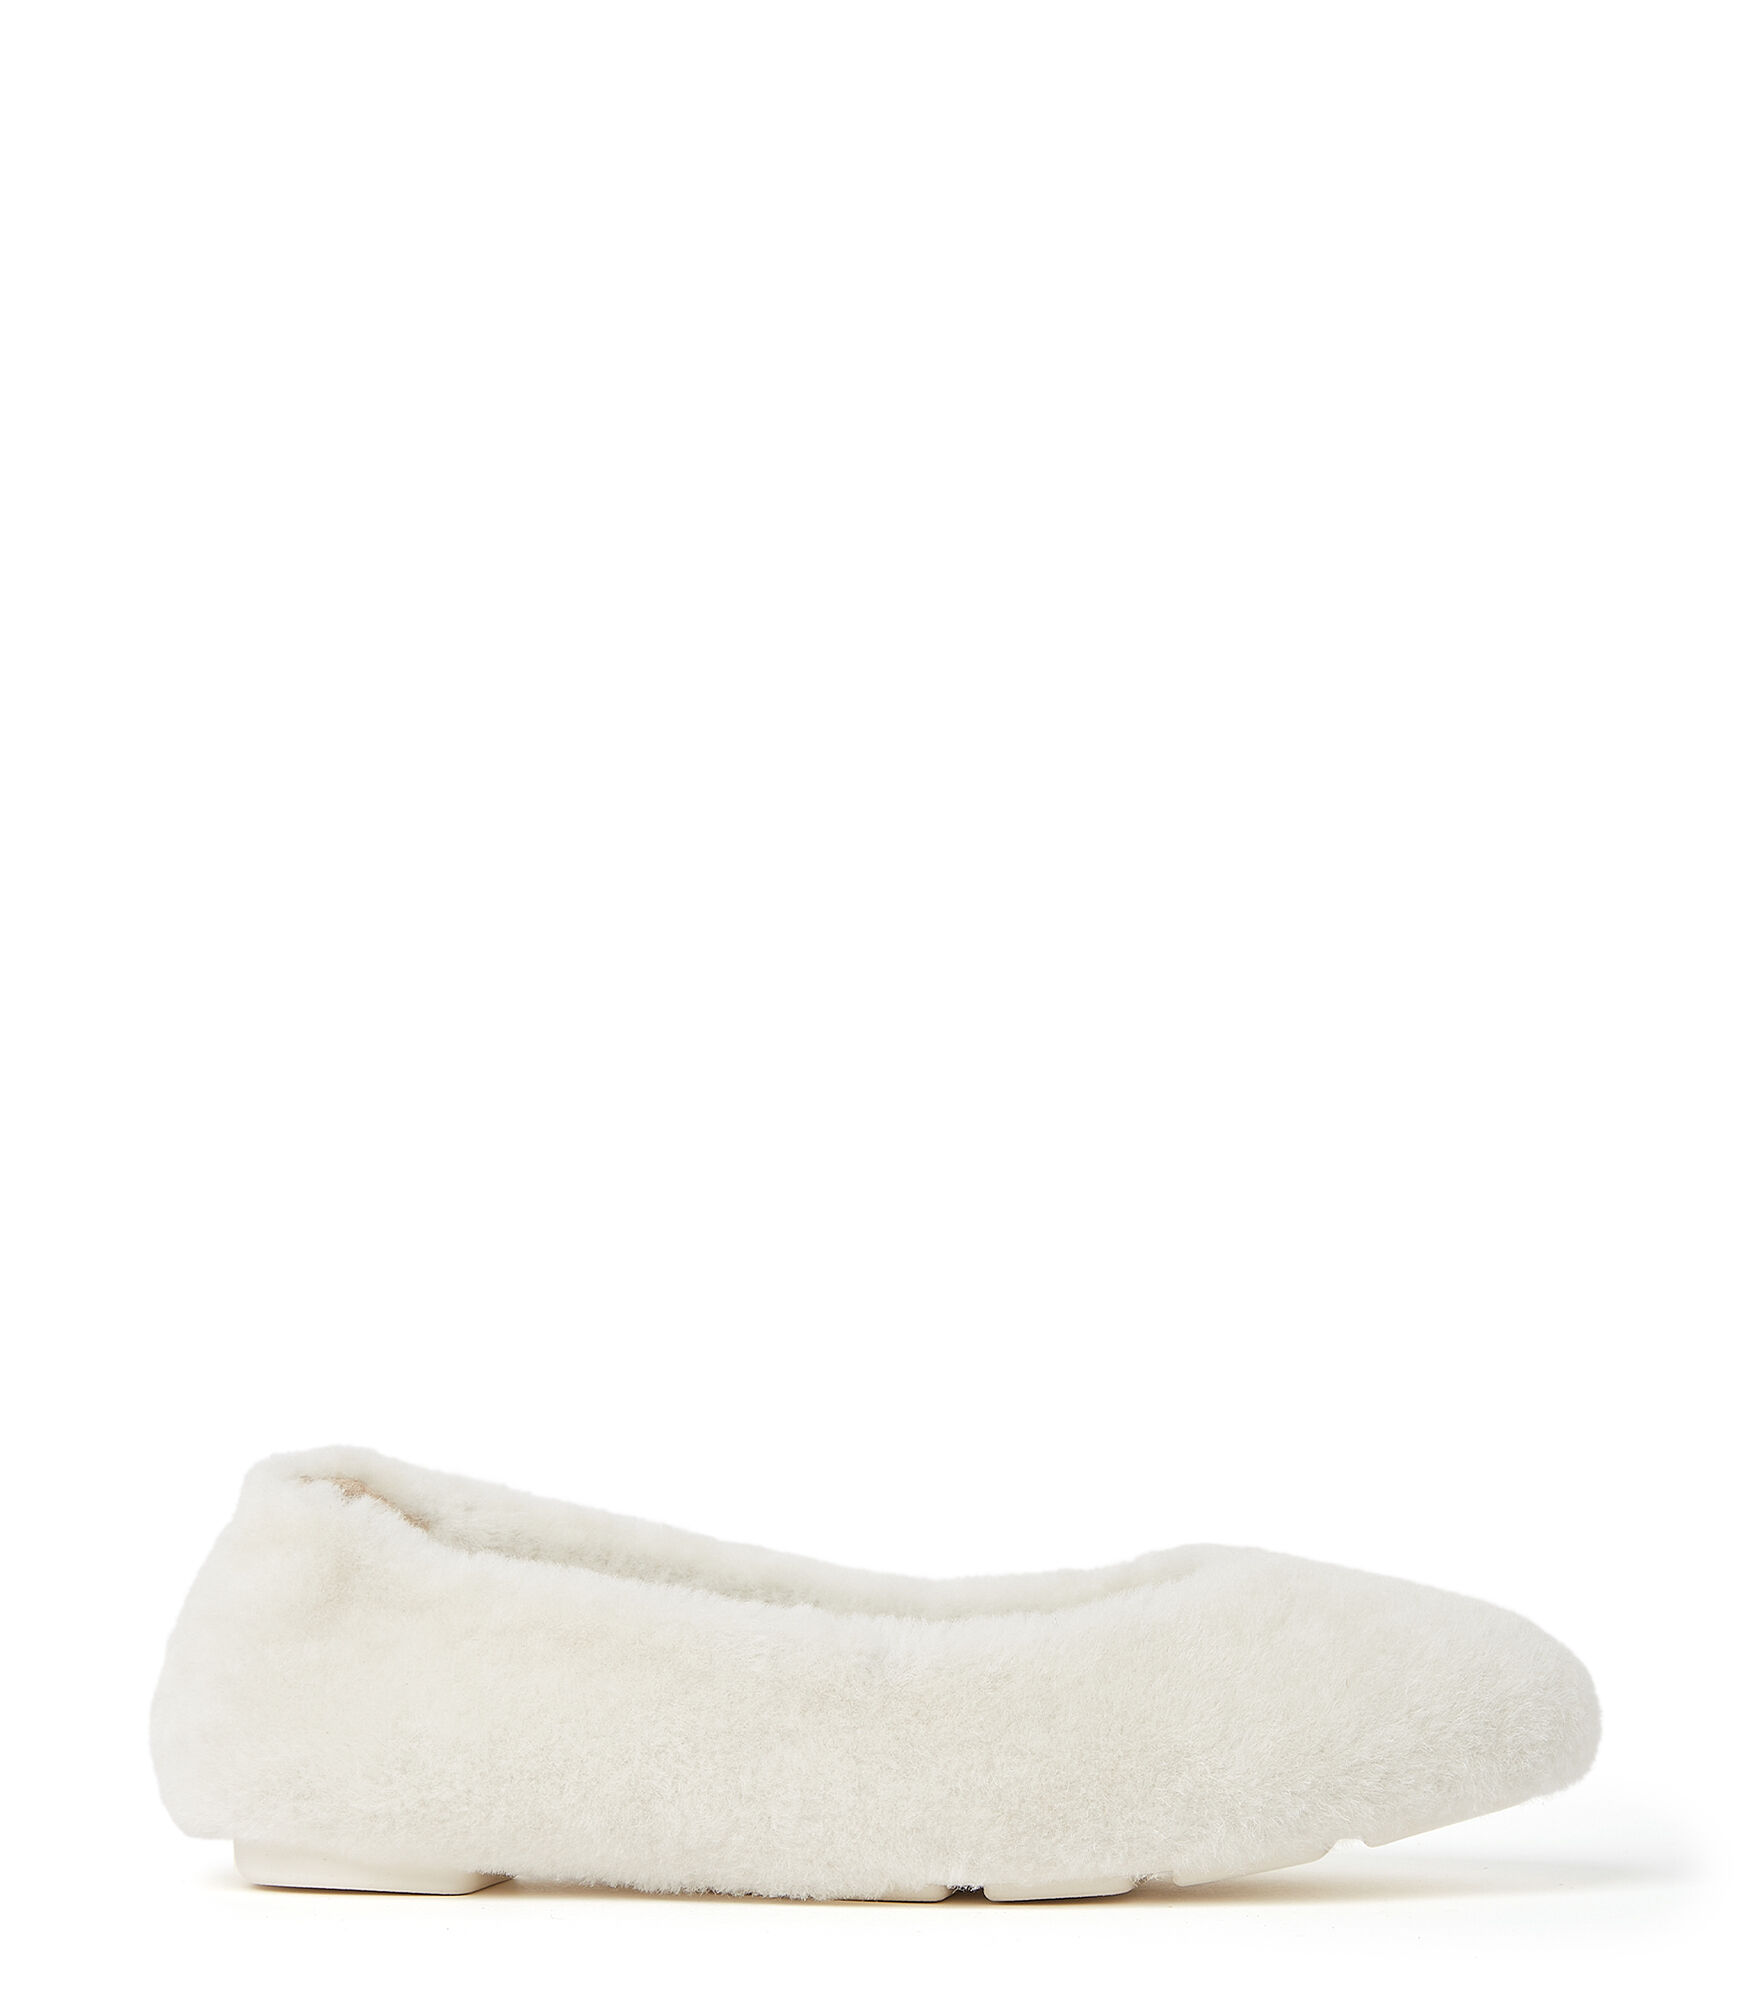 Stuart Weitzman , Pirouette Super Chill Flat, Early Access Black Friday, Cream, Shearling